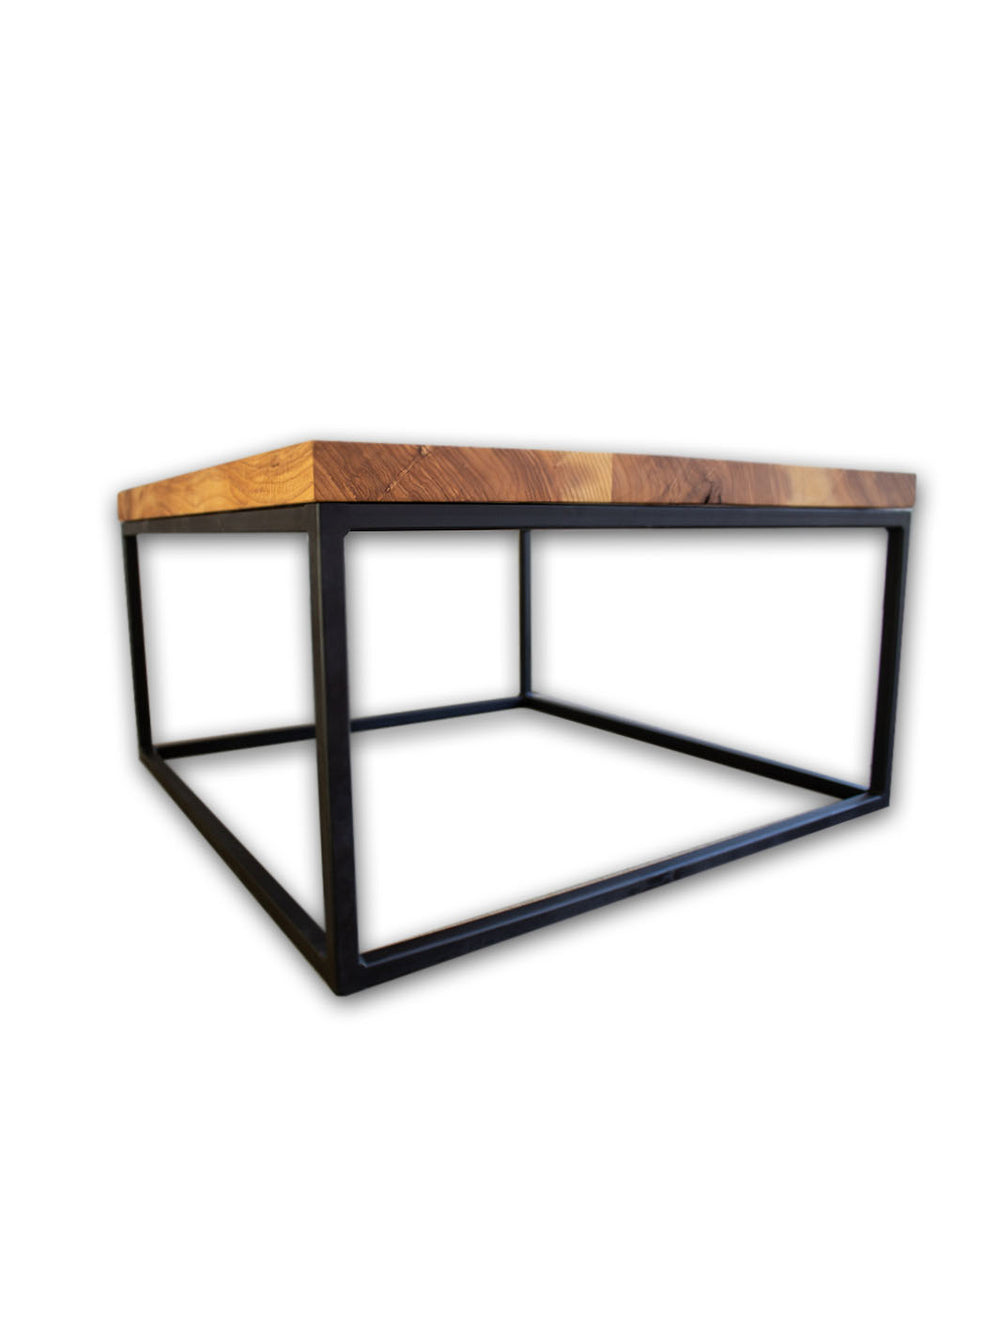 Industrial Solid Wood and Steel Coffee Table Earthly Comfort Coffee Tables 556-1